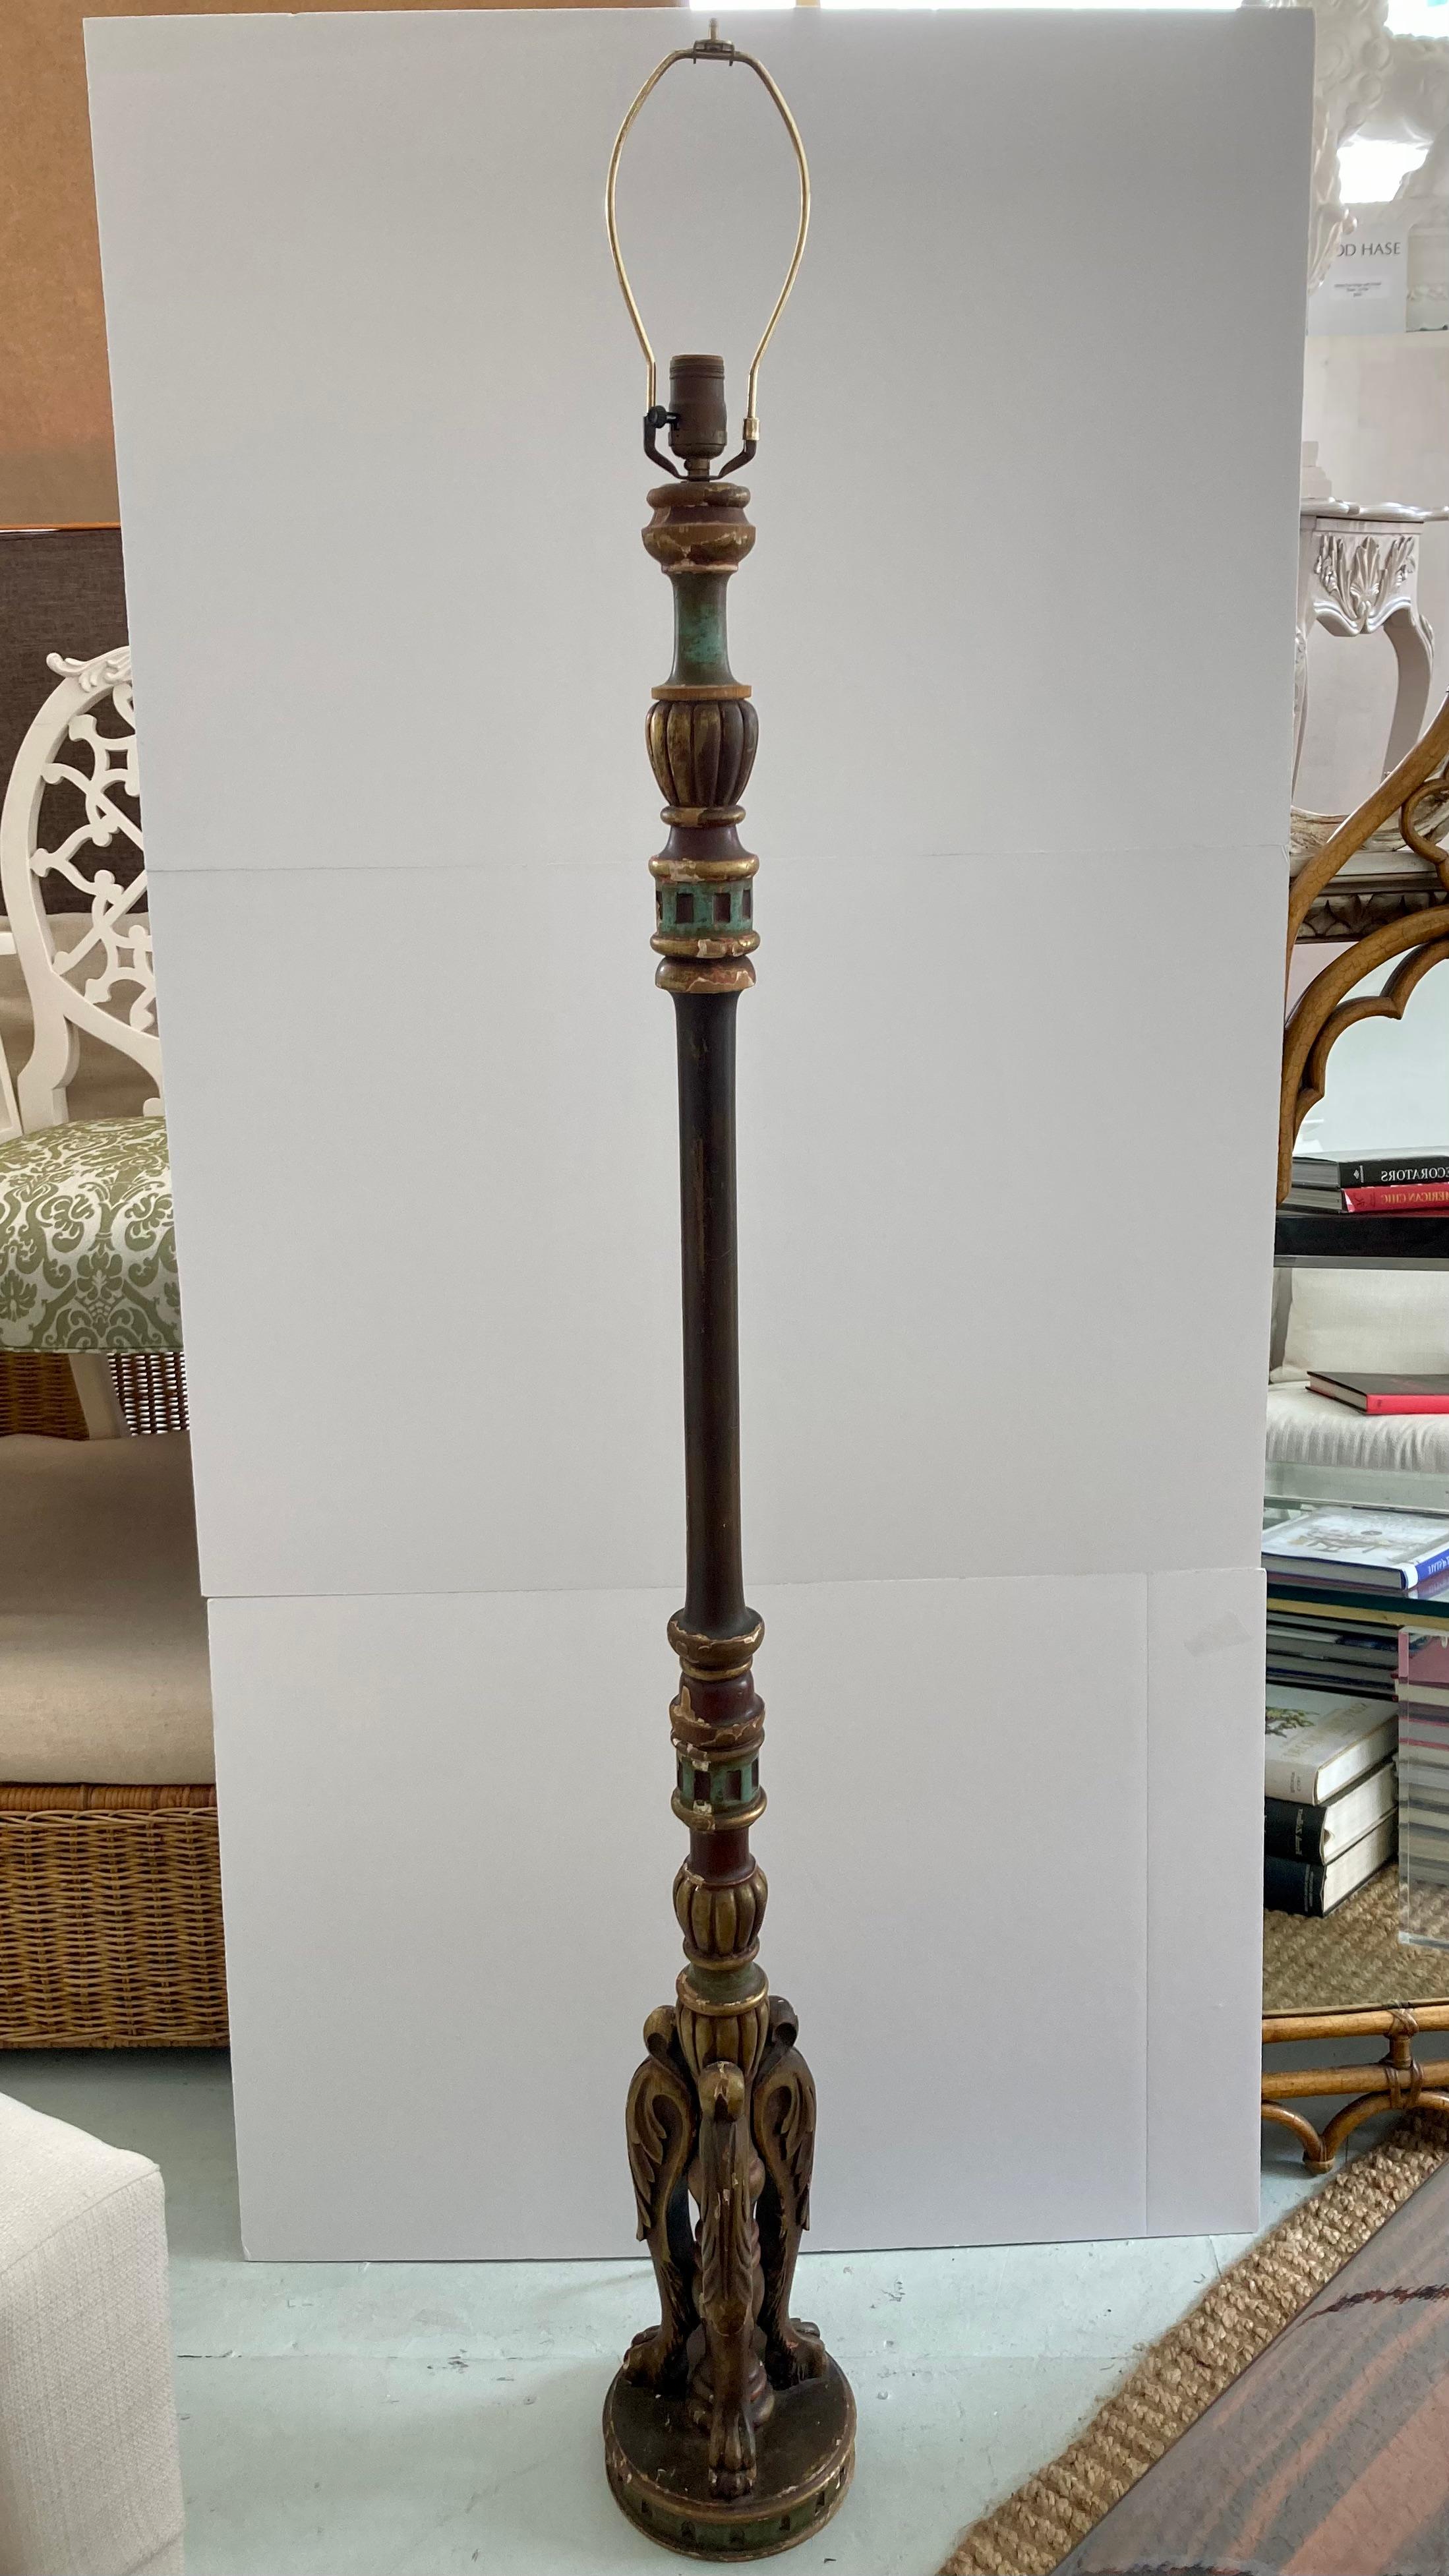 Italian 19th Century polychrome wood floor lamp. Amazing hand painted details and wood carvings. Some chips and wear but add to the original character.